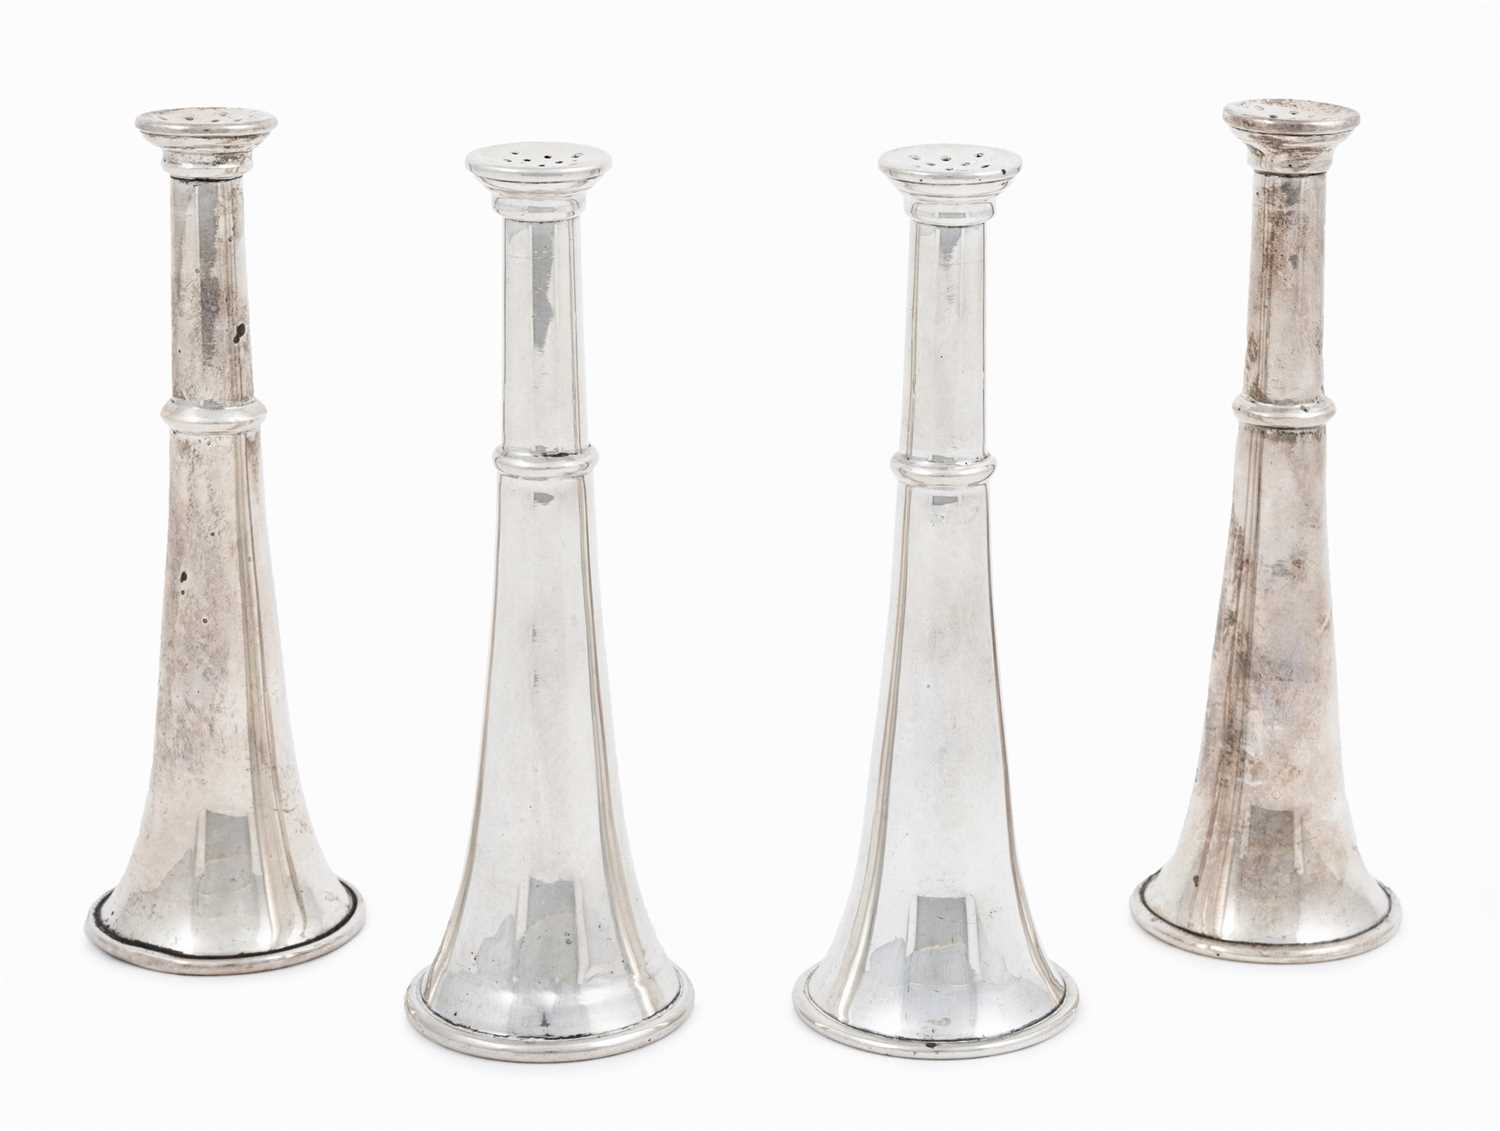 Lot 104 - Four silver novelty condiments, designed as hunting horns, Walker and Hall, Sheffield 1925